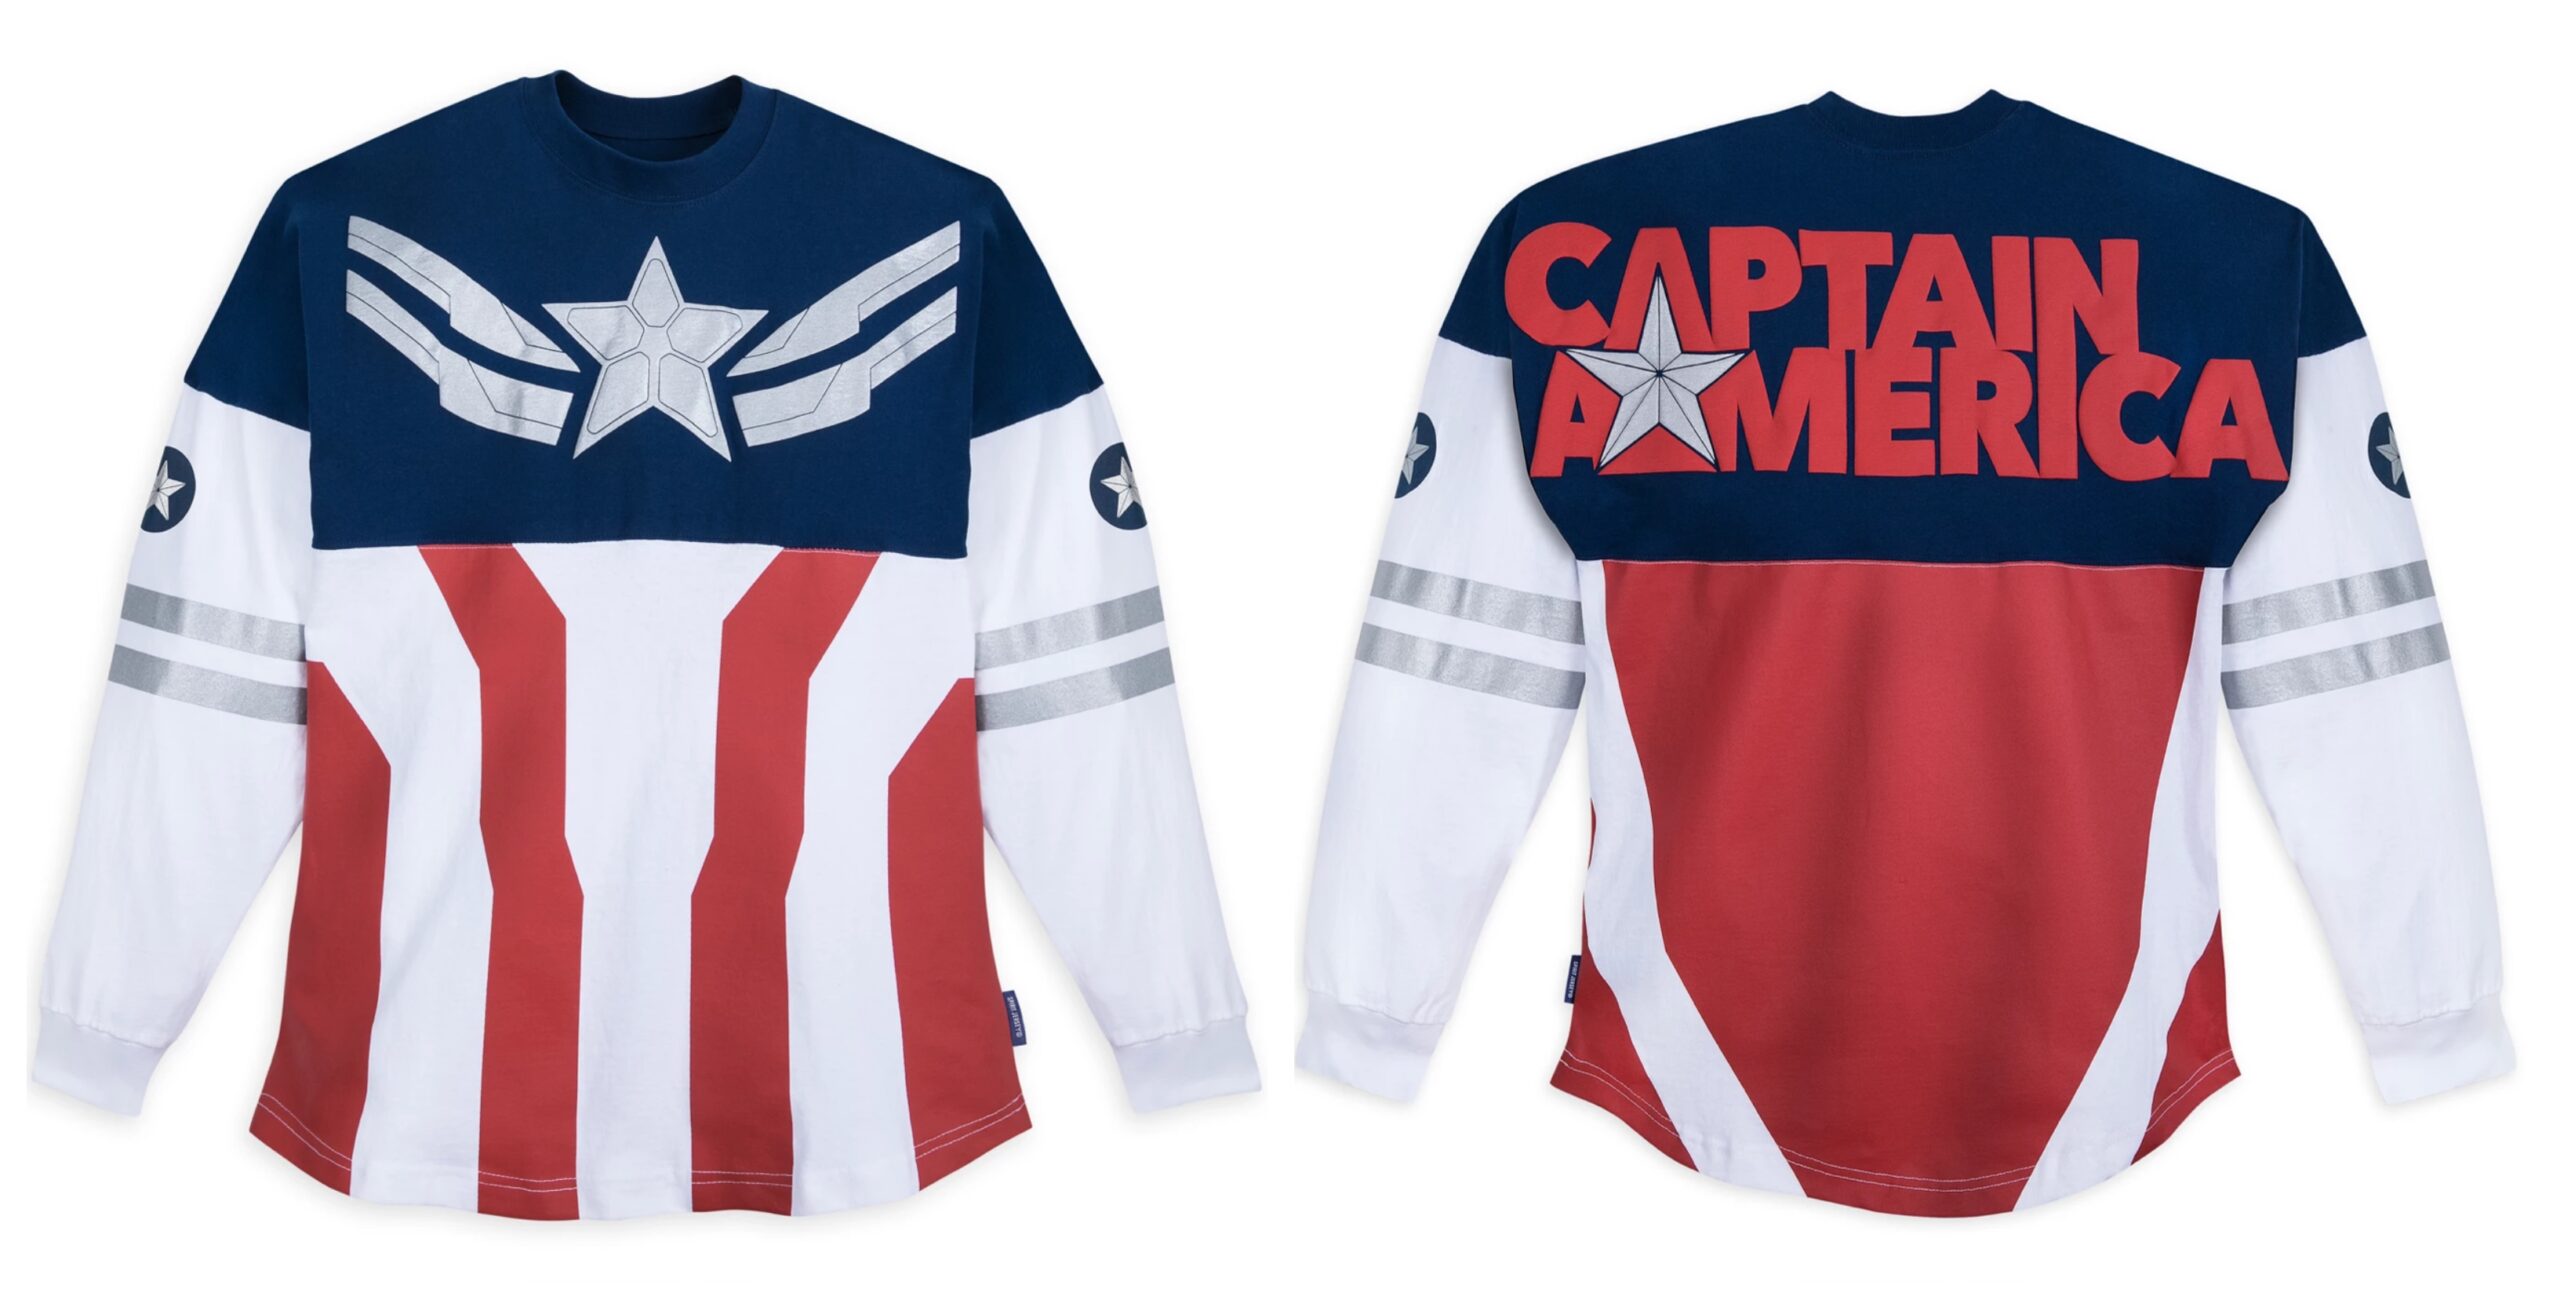 Check out the New Marvel Merch Inspired by 'The Falcon and the Winter Soldier'